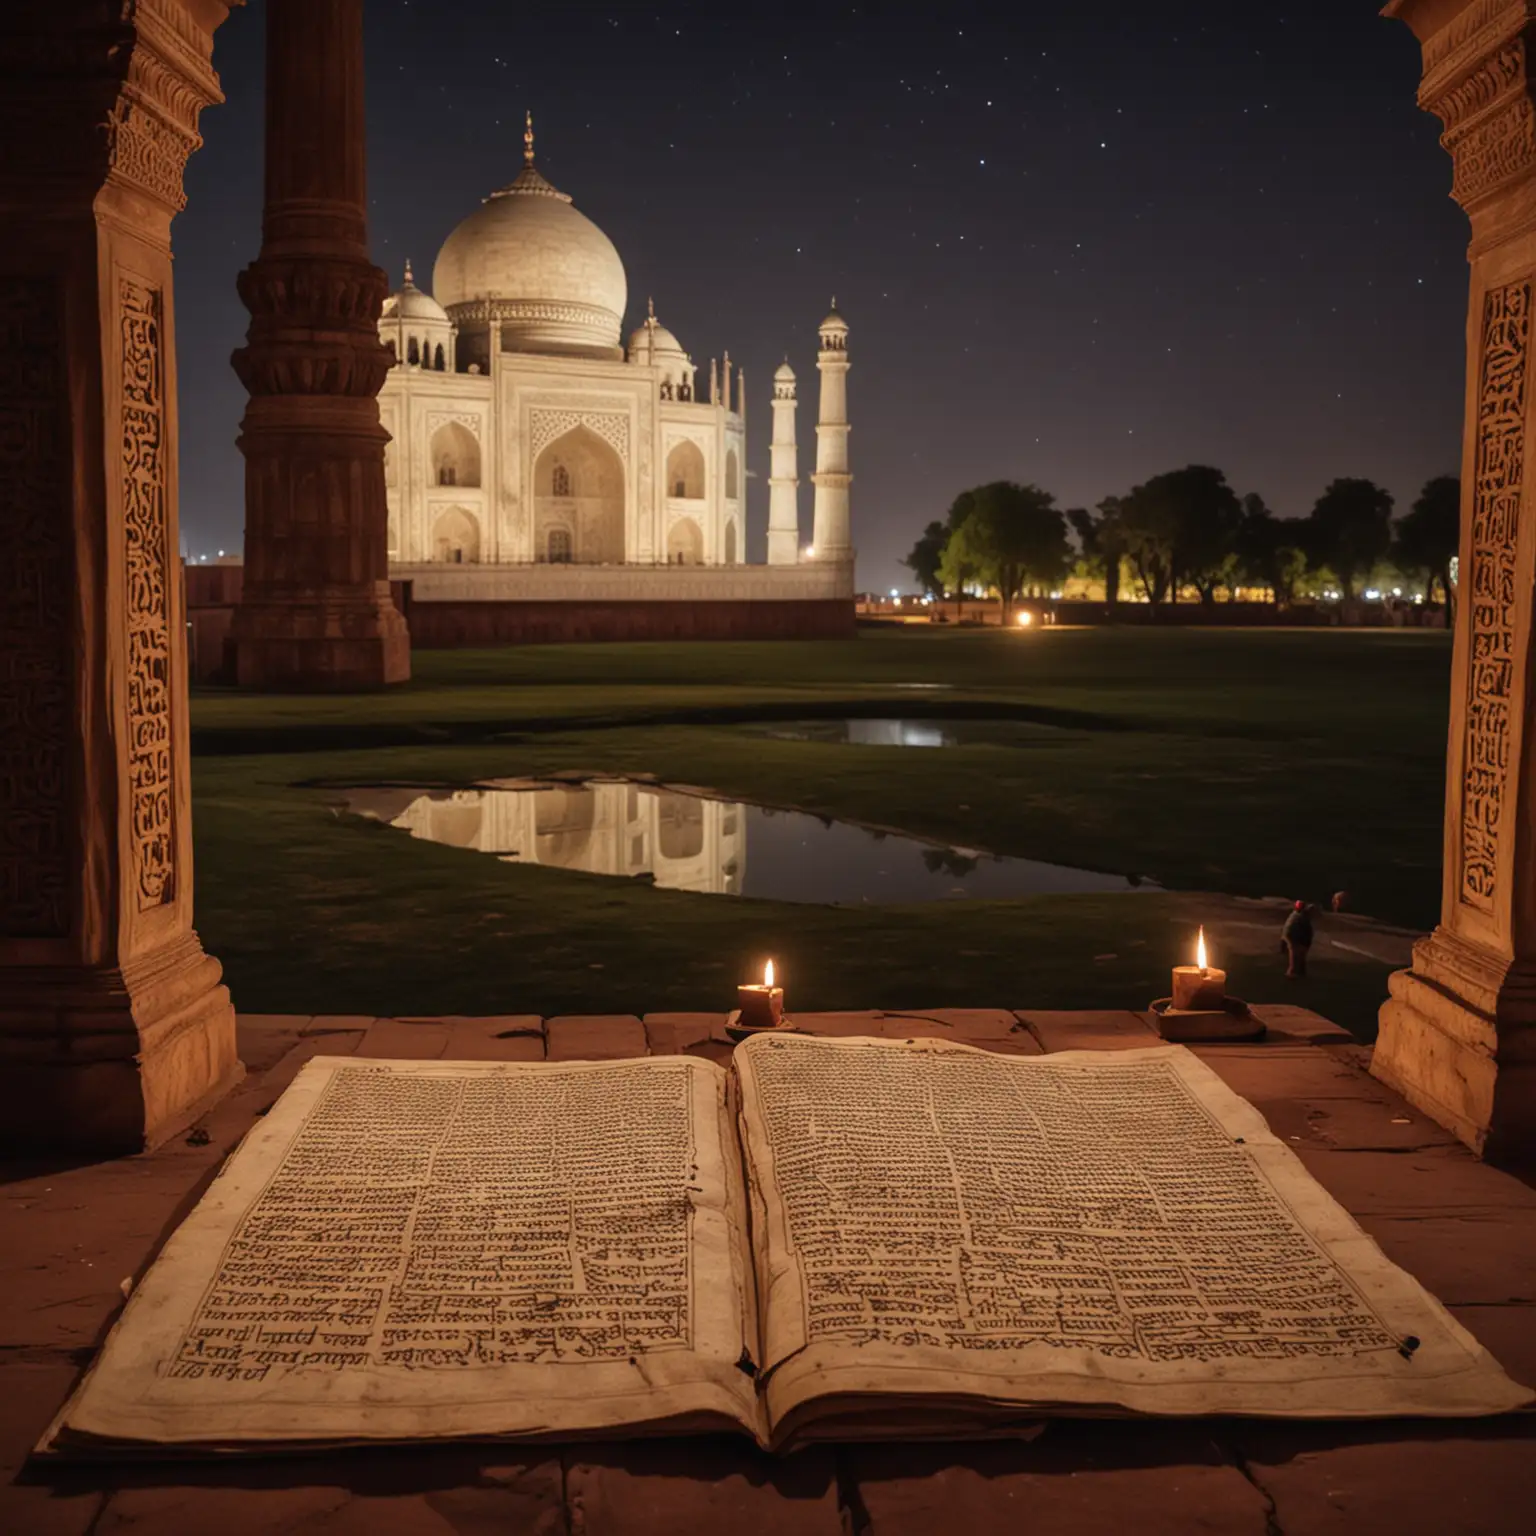 Ancient Tantra texts over a pooja kunda set to the background of the Taj Mahal at night
